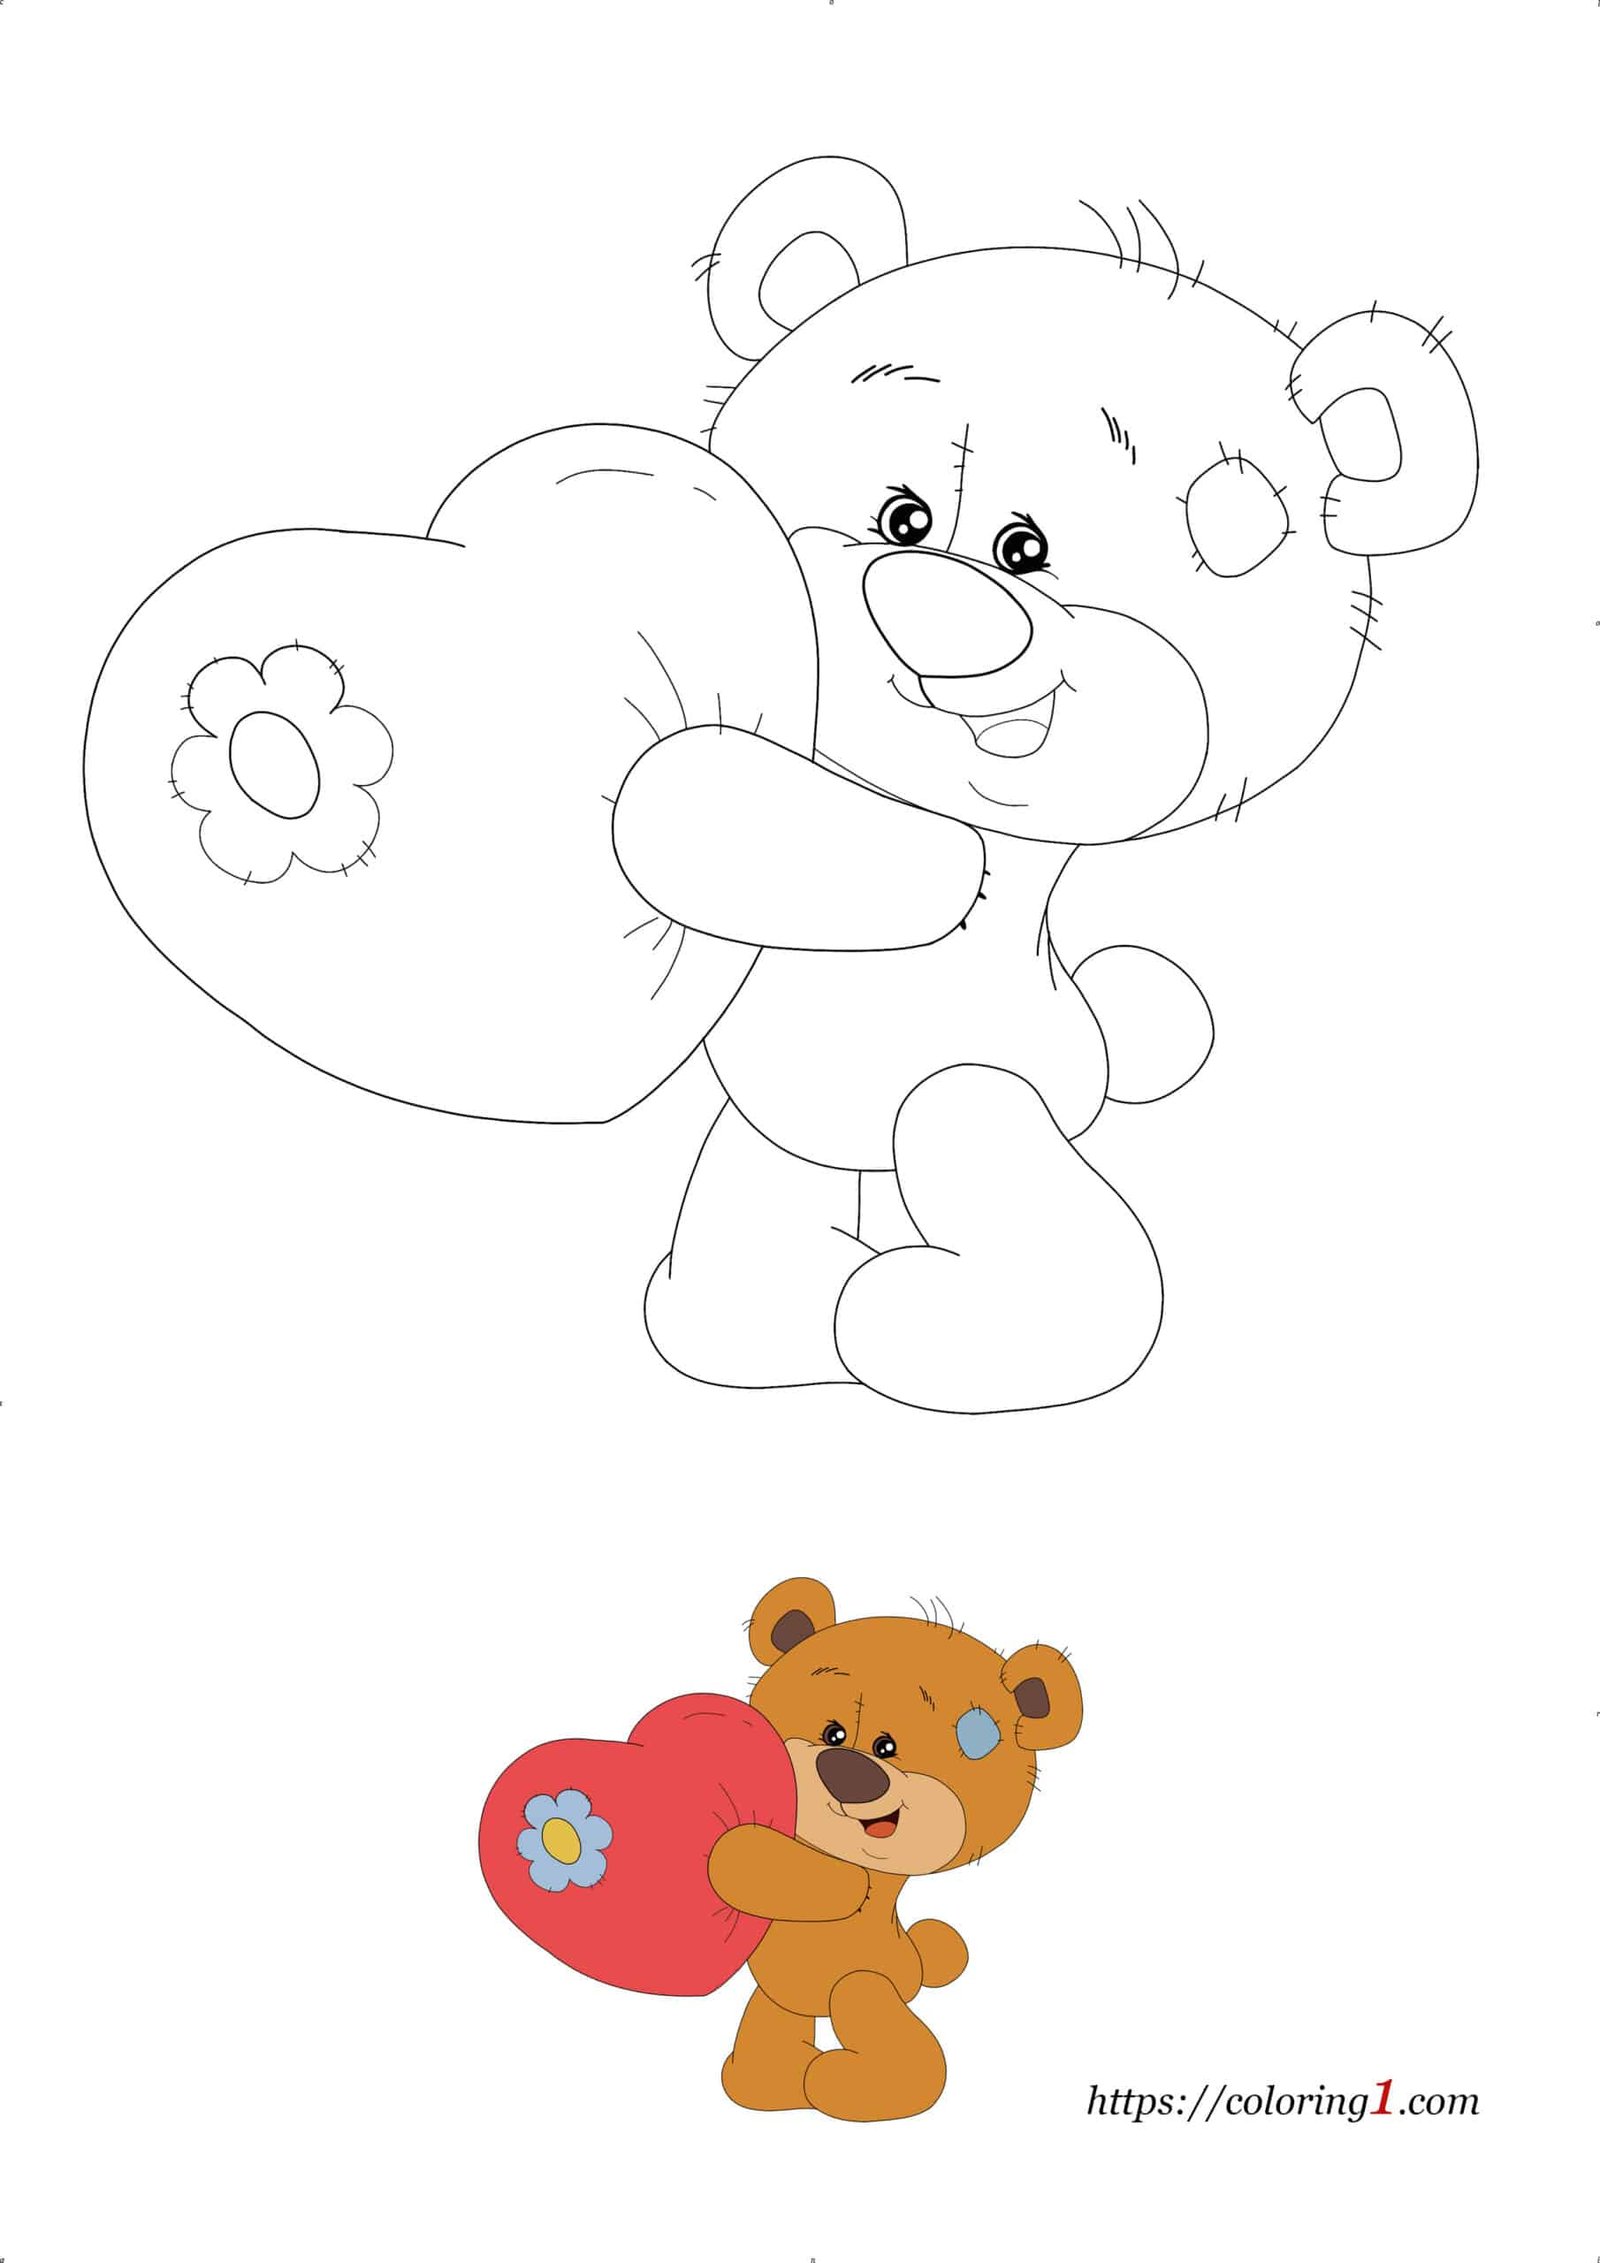 Teddy bear with heart coloring pages